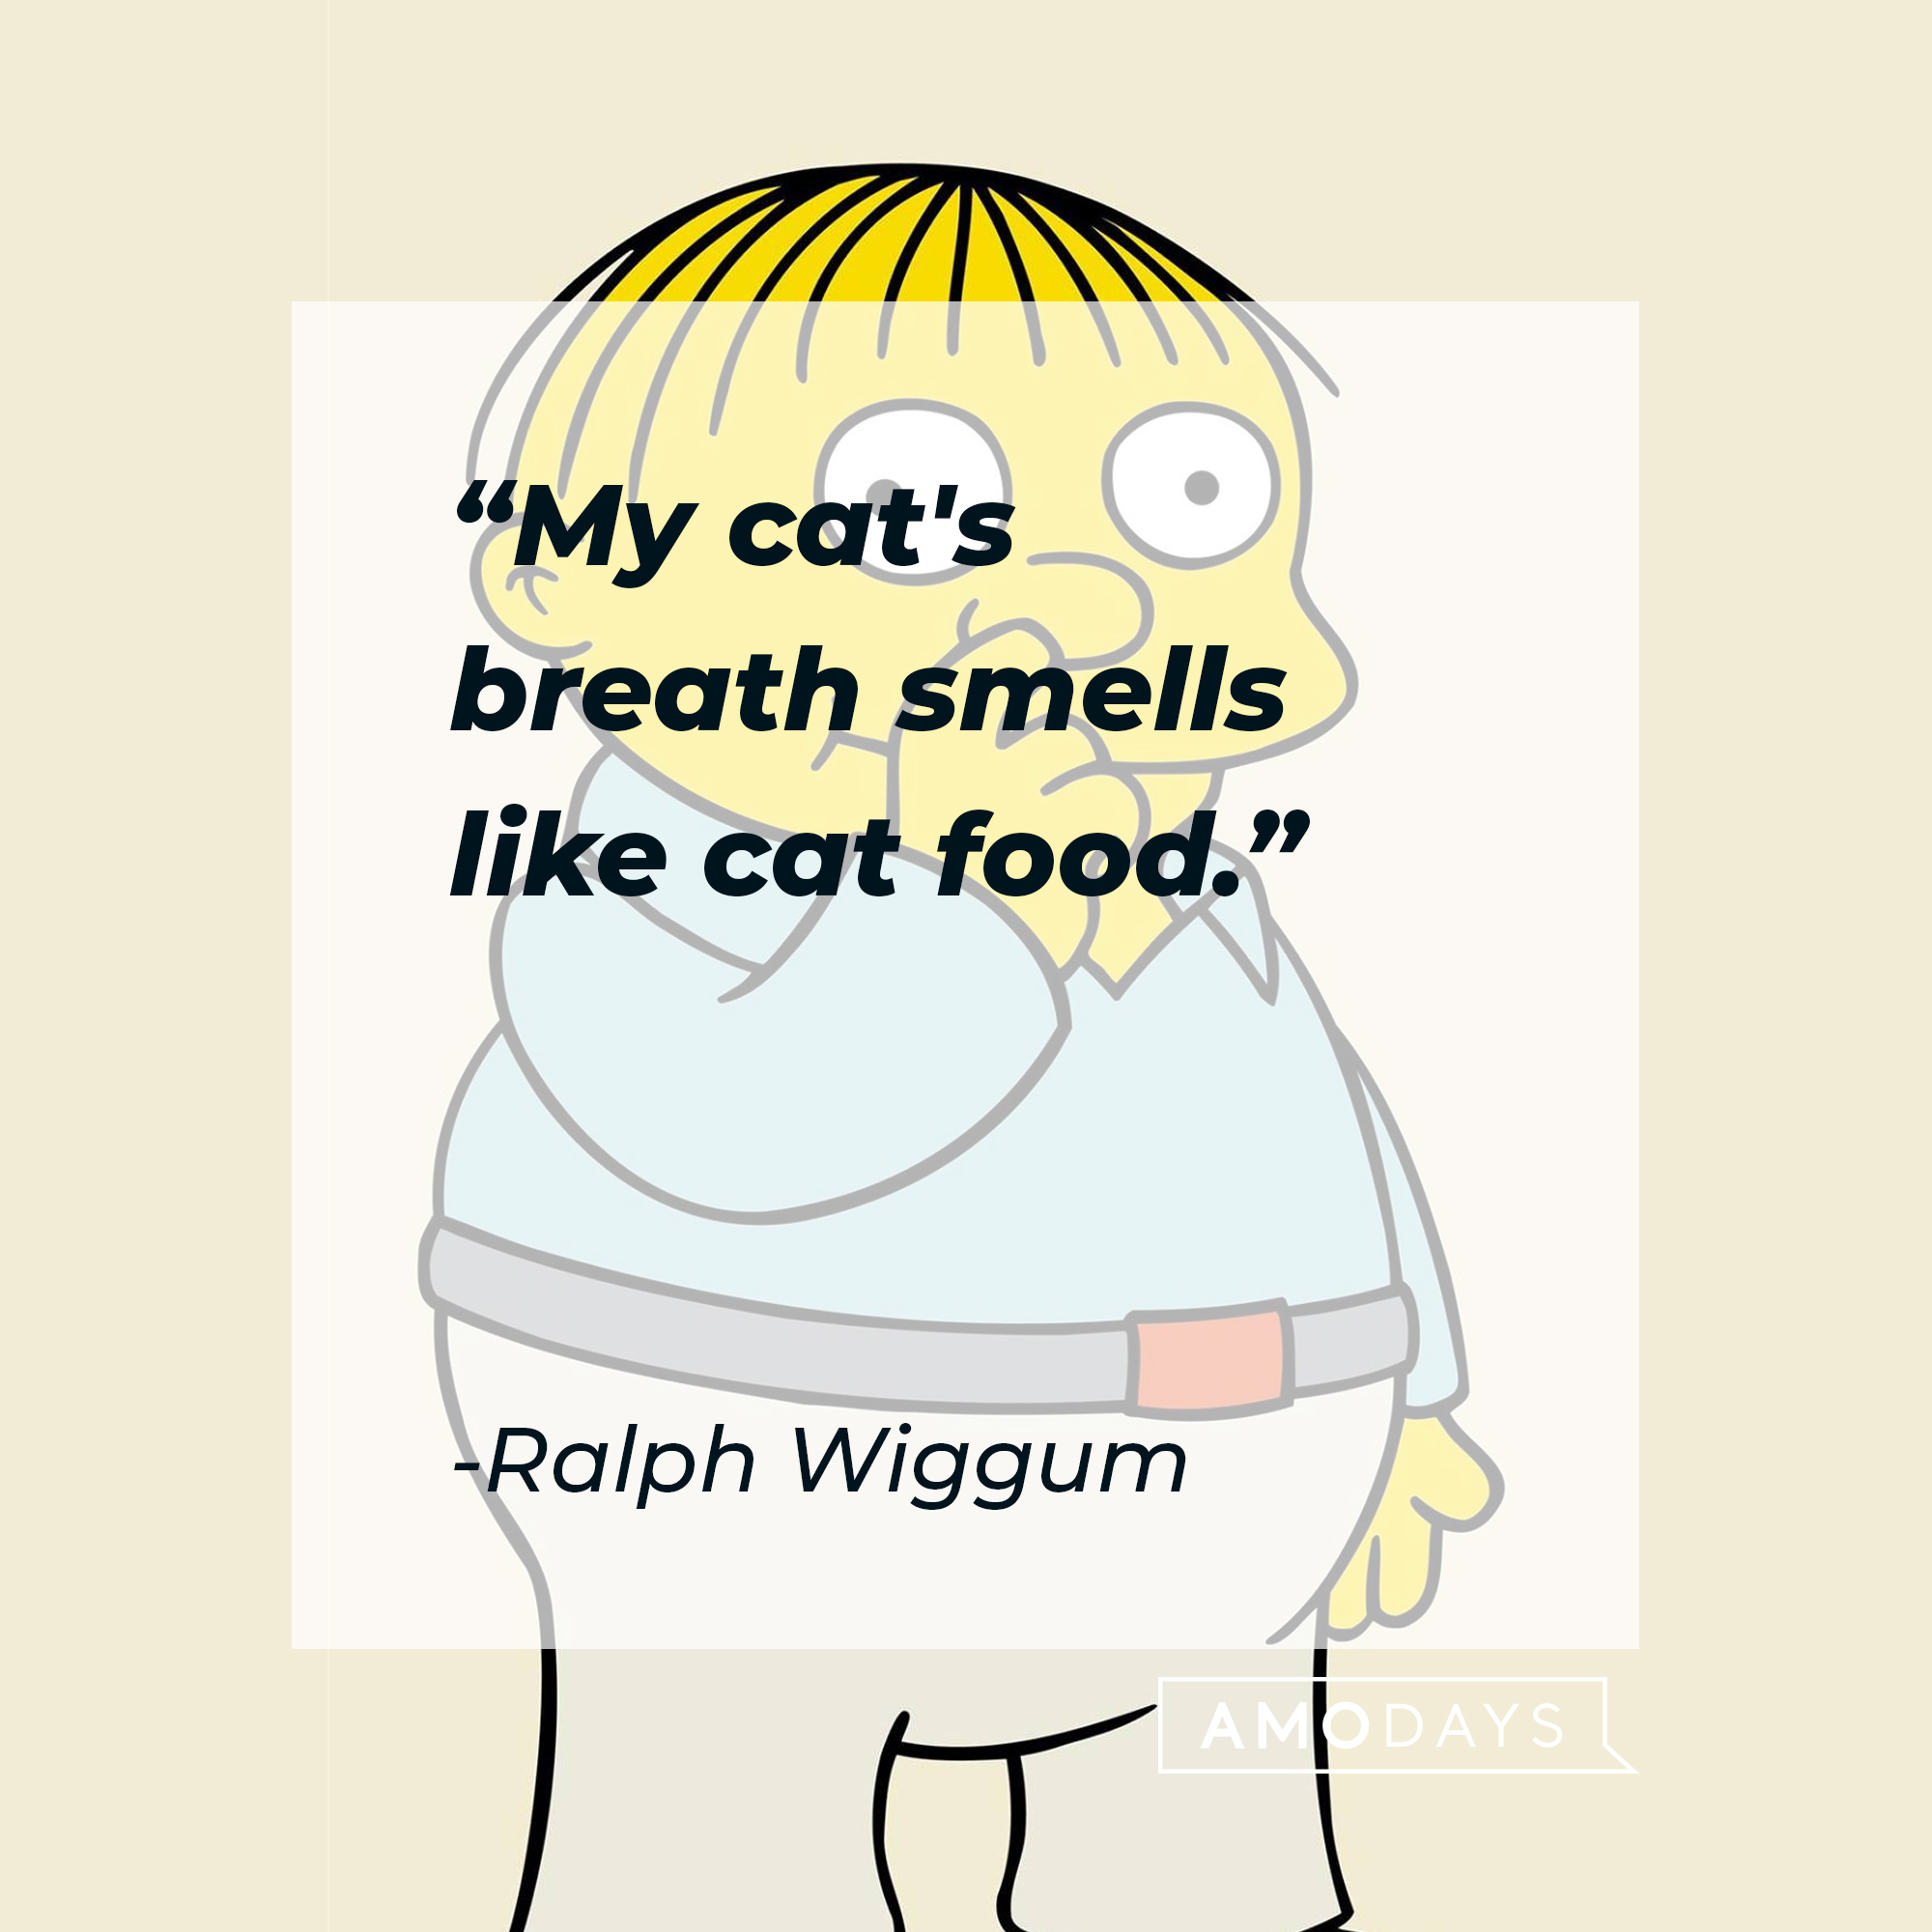 Ralph Wiggum's quote: "My cat's breath smells like cat food." | Source: facebook.com/TheSimpsons